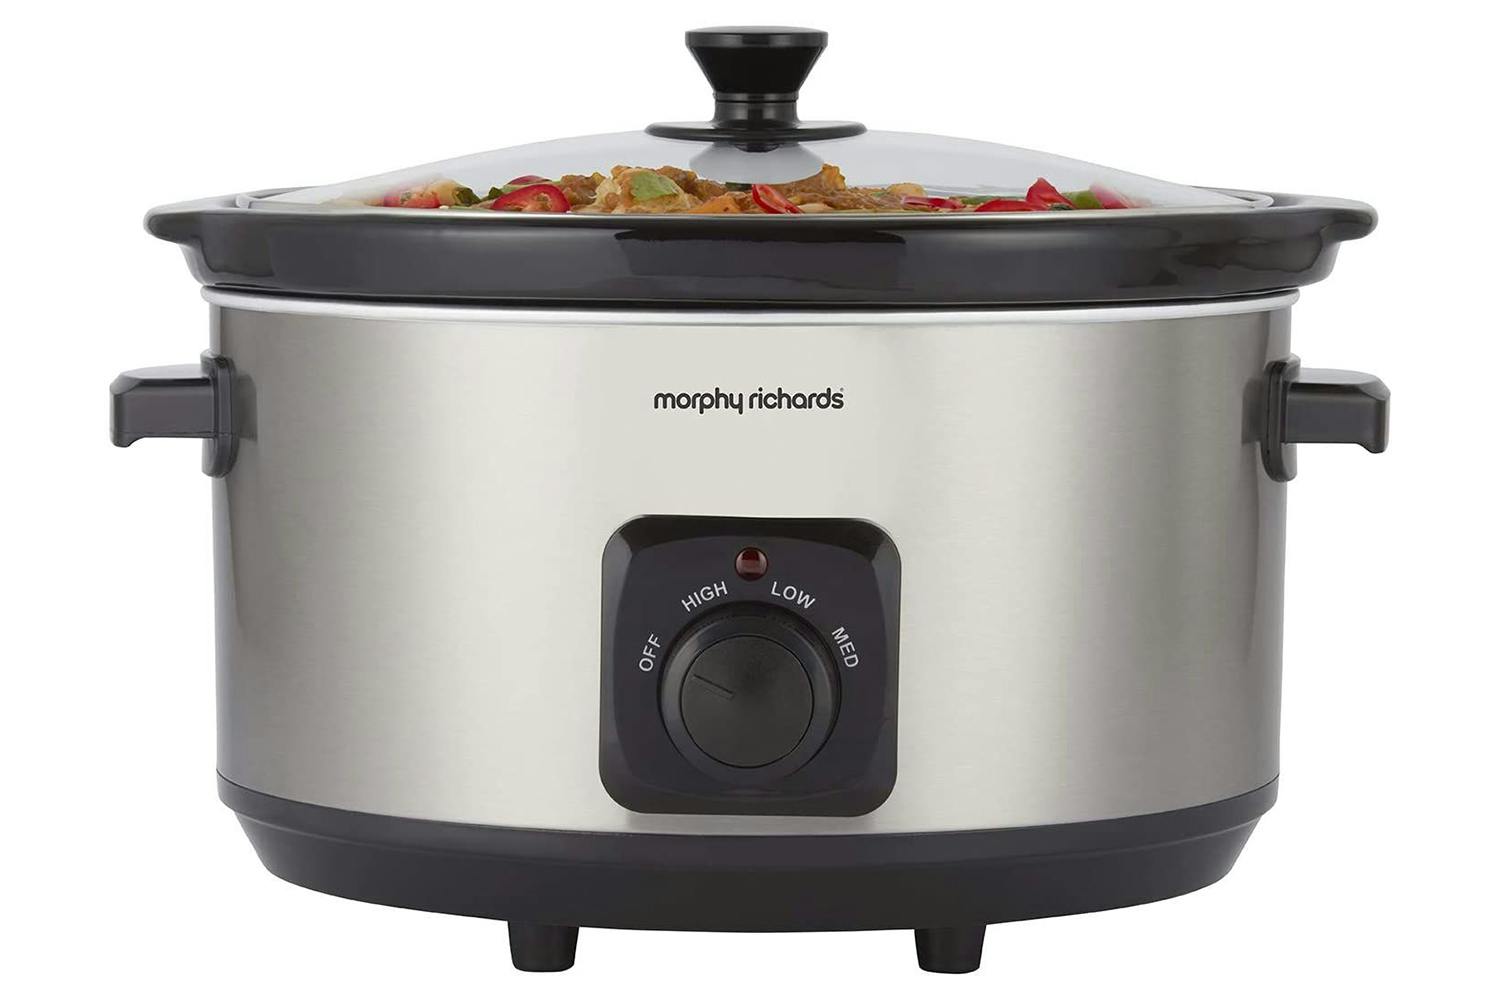 Morphy Richards 6.5L Ceramic Slow Cooker | 461013 | Brushed Stainless Steel